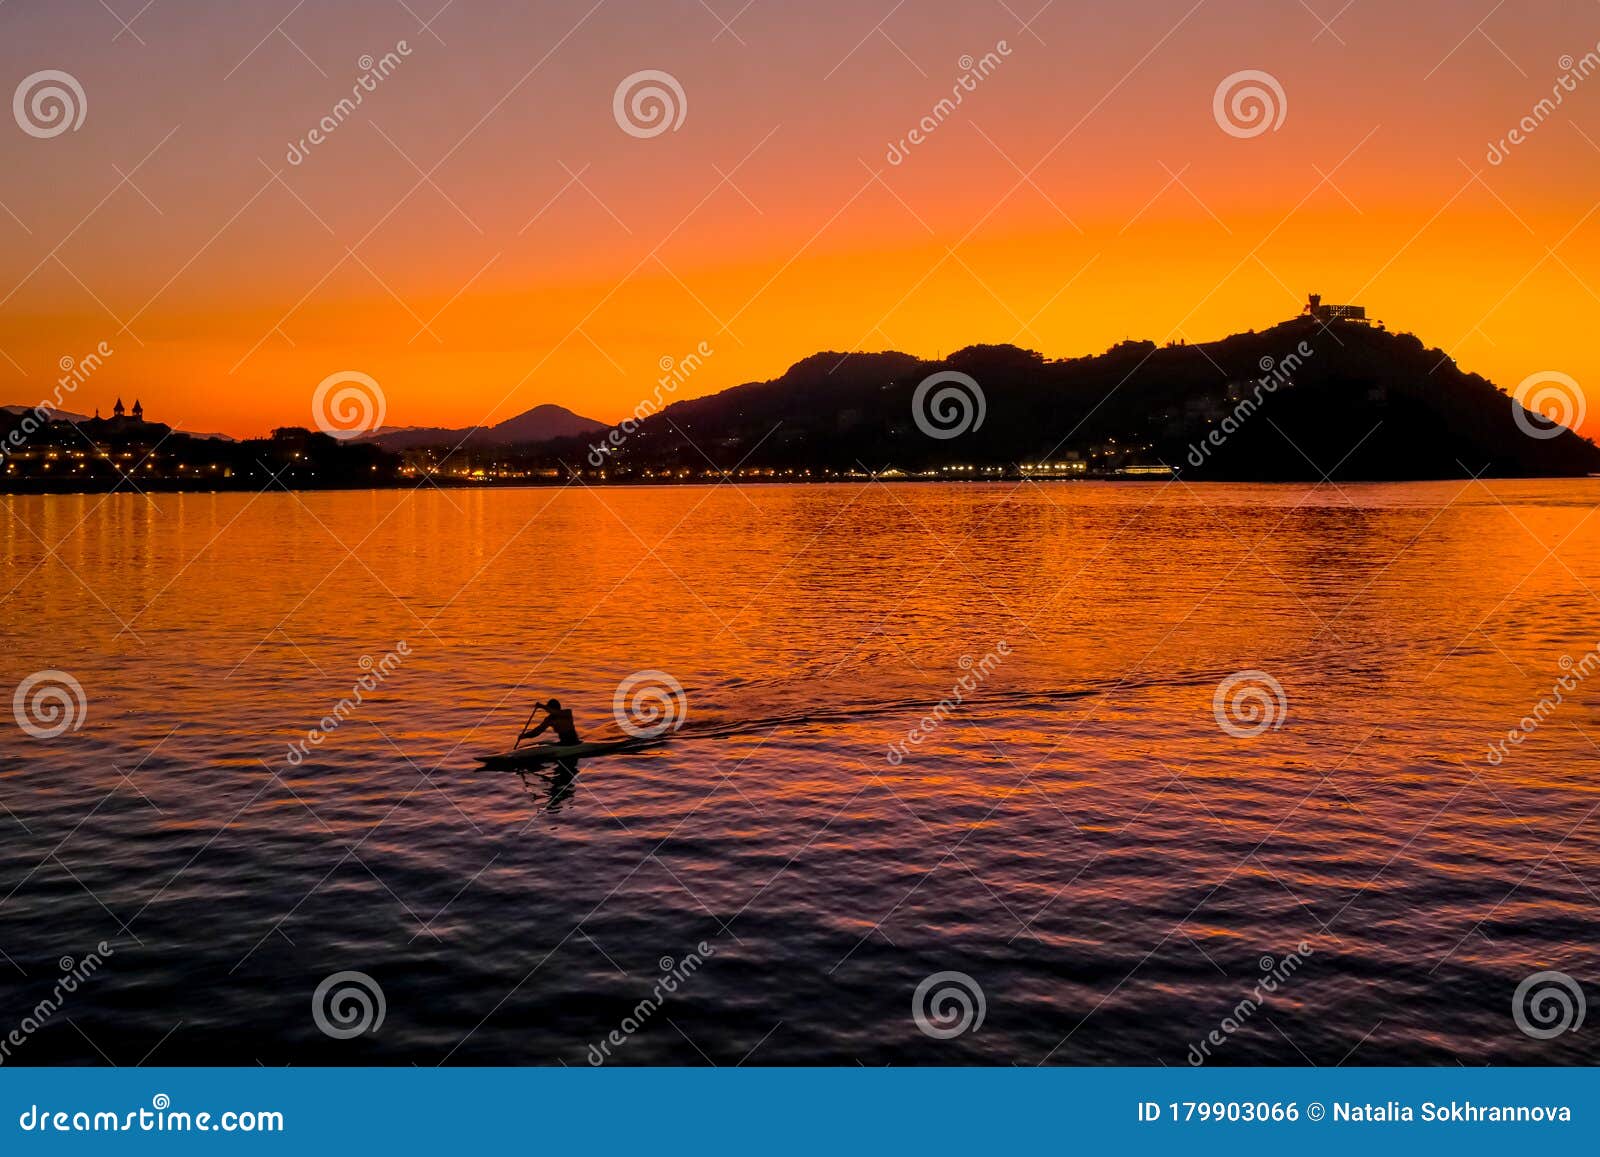 sunset on mount igueldo and and man with a paddle in koyak in donosti san sebastian, basque country, northern spain